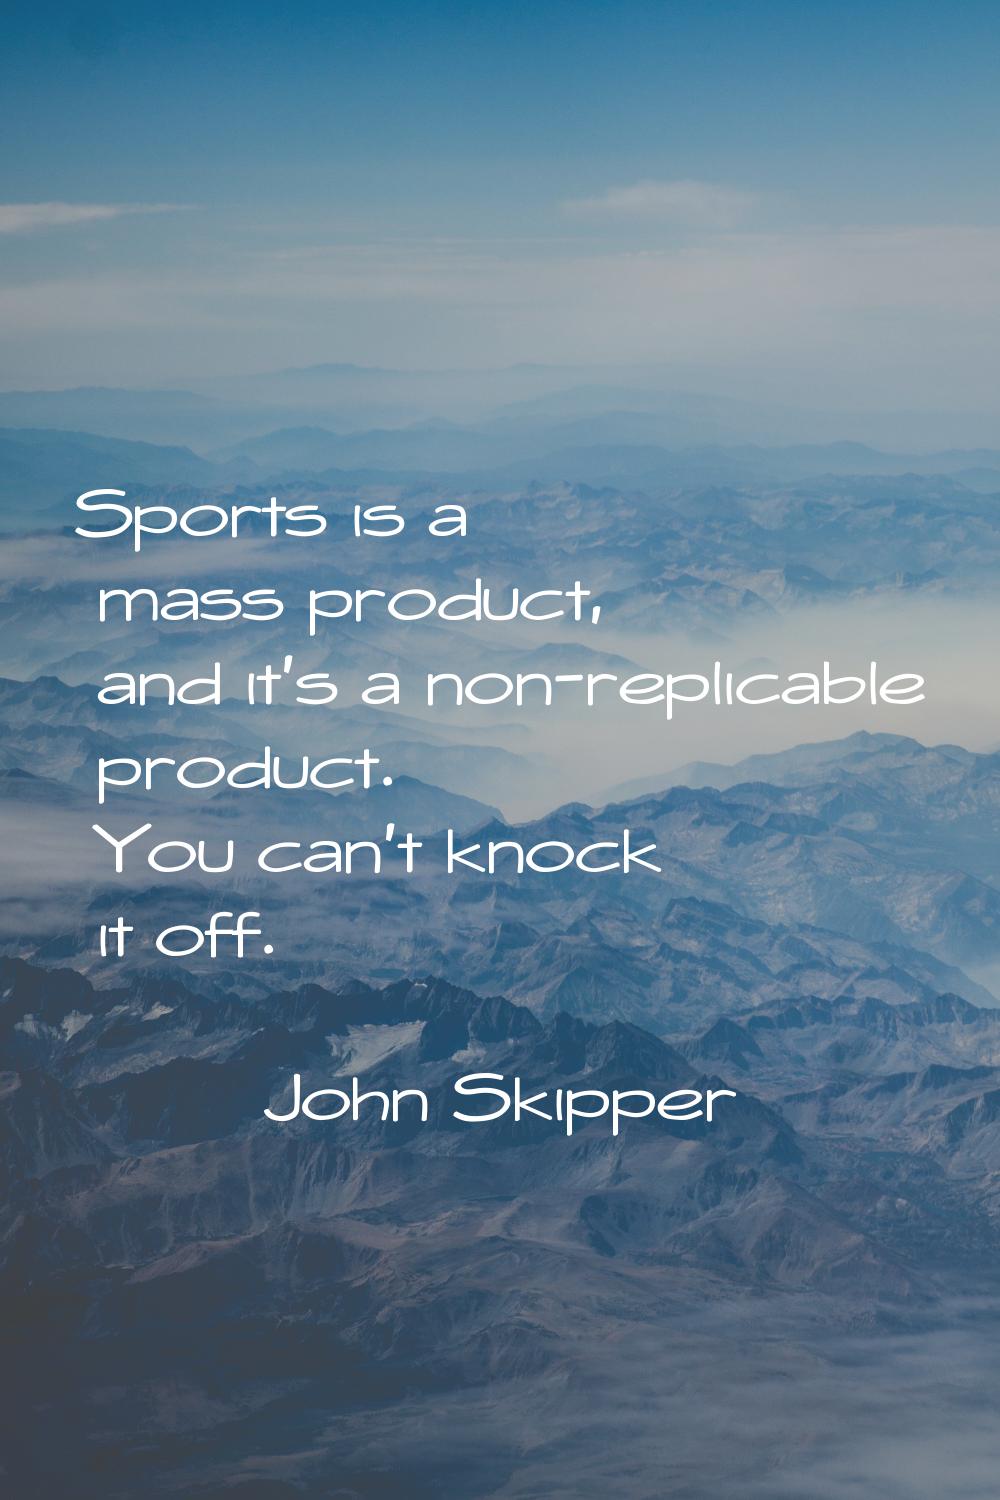 Sports is a mass product, and it's a non-replicable product. You can't knock it off.